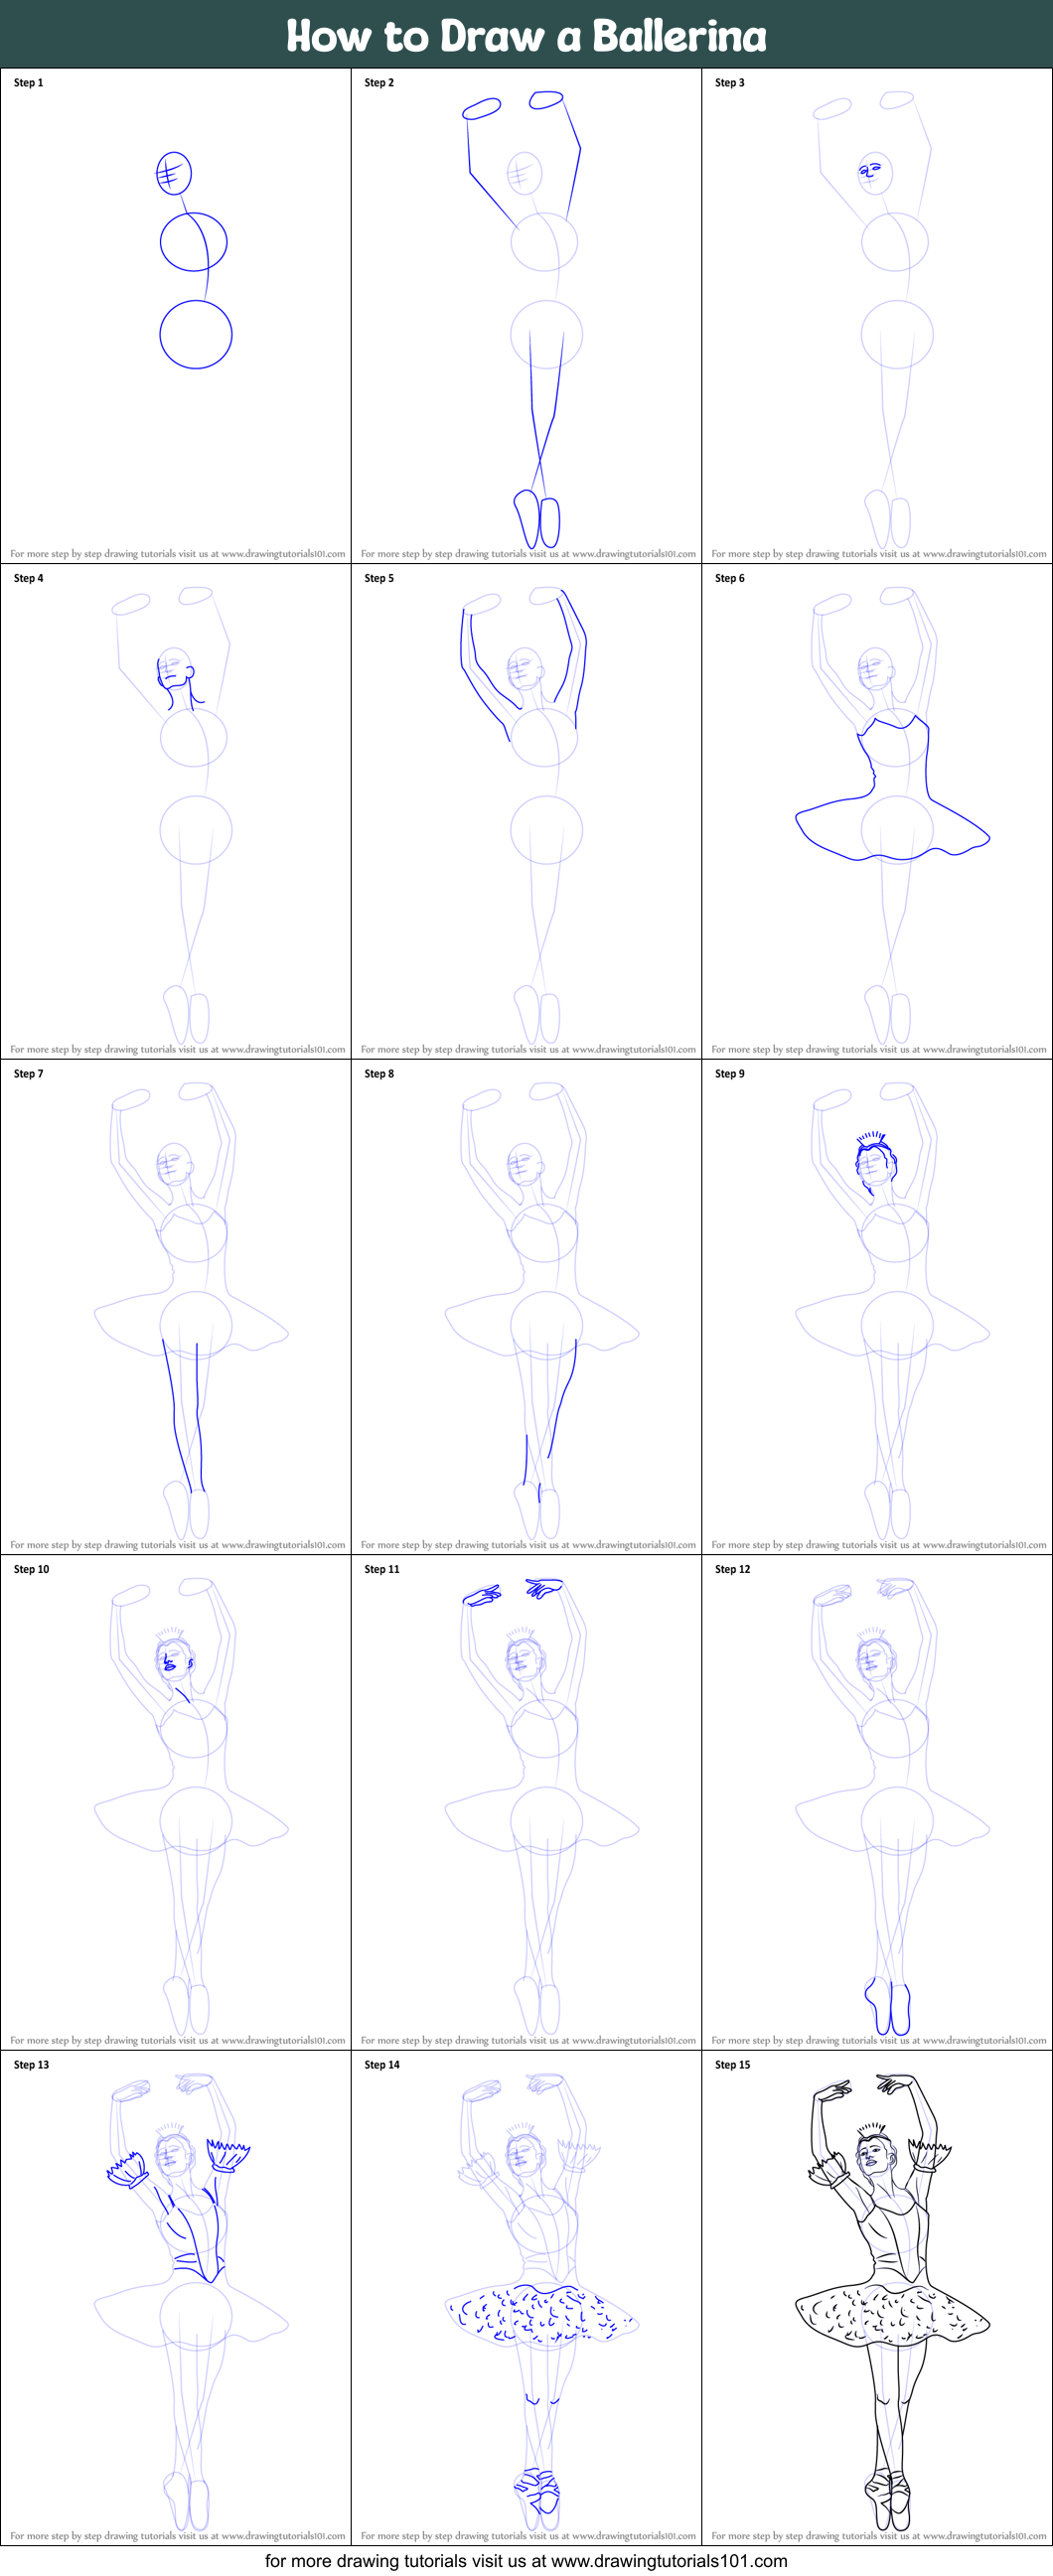 How to Draw a Ballerina printable step by step drawing sheet